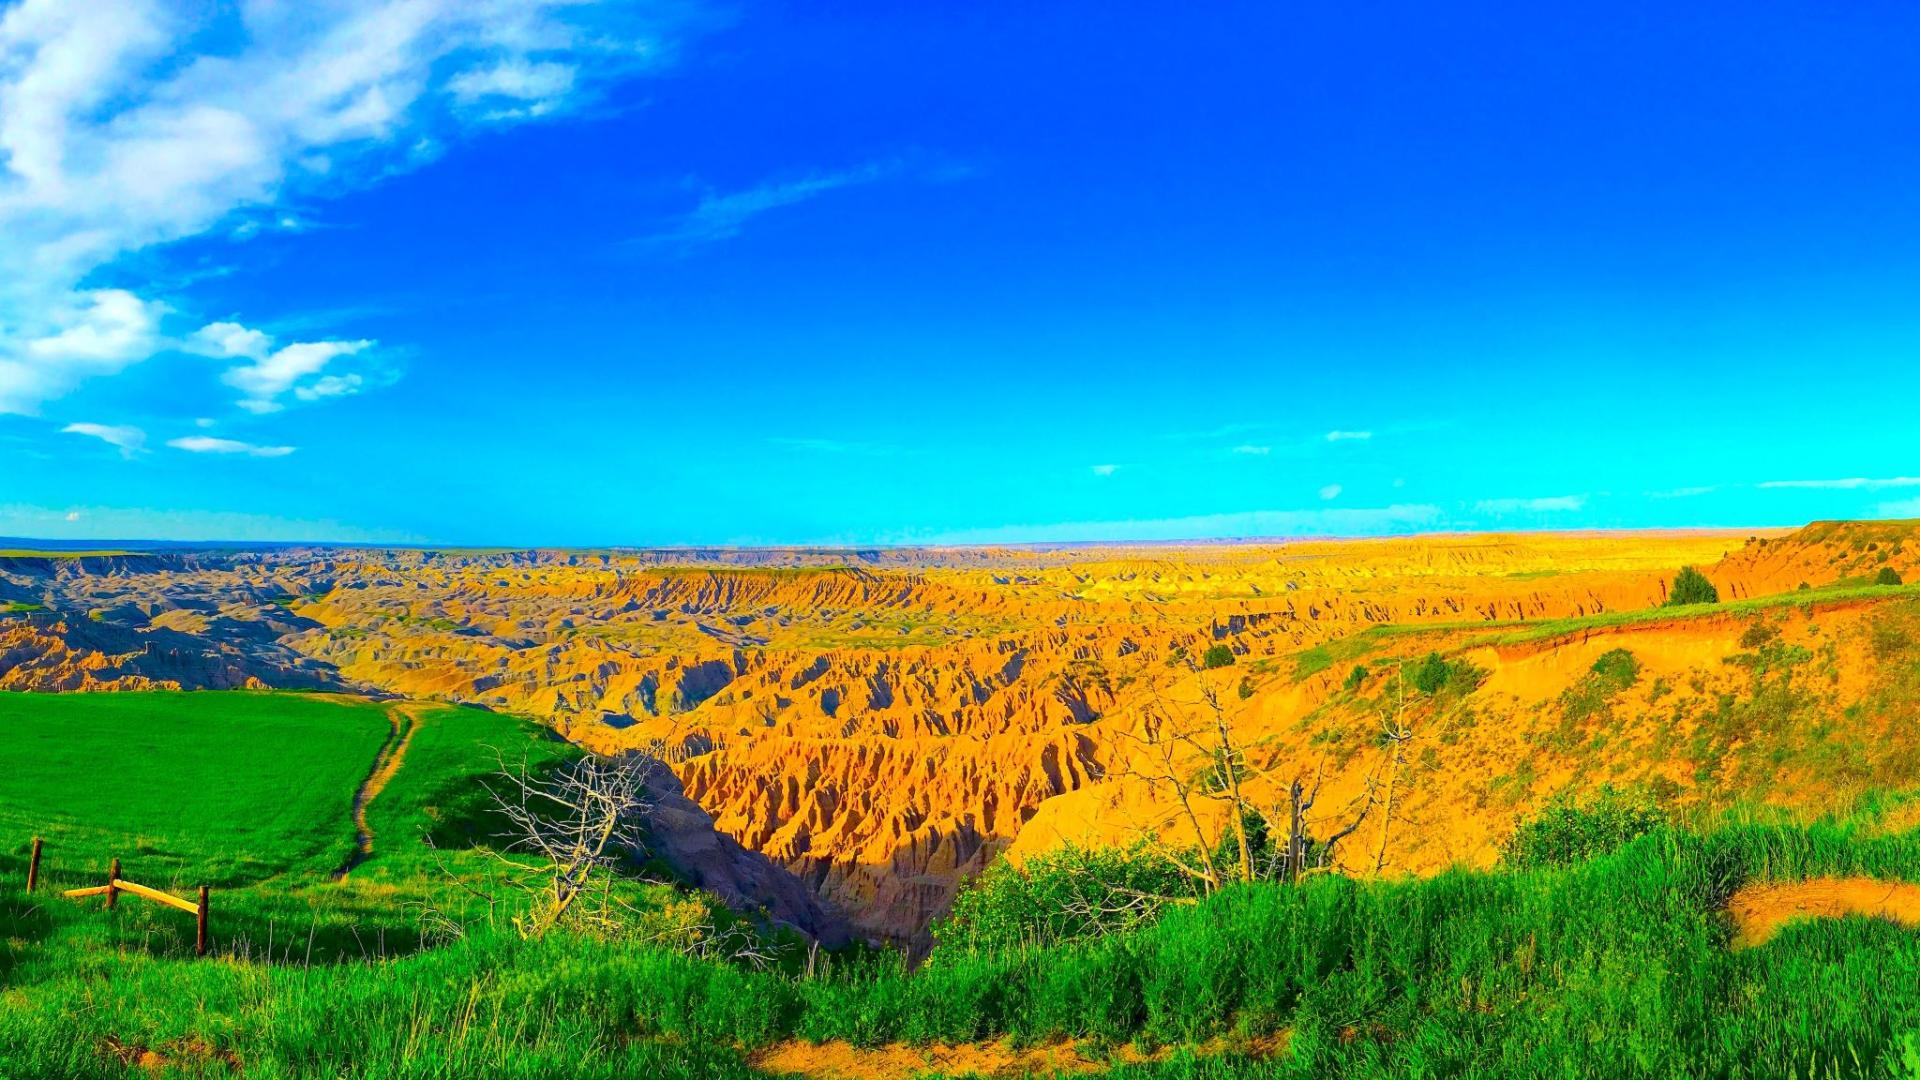 Photograph of a landscape of green and yellow hills against a blue sky.